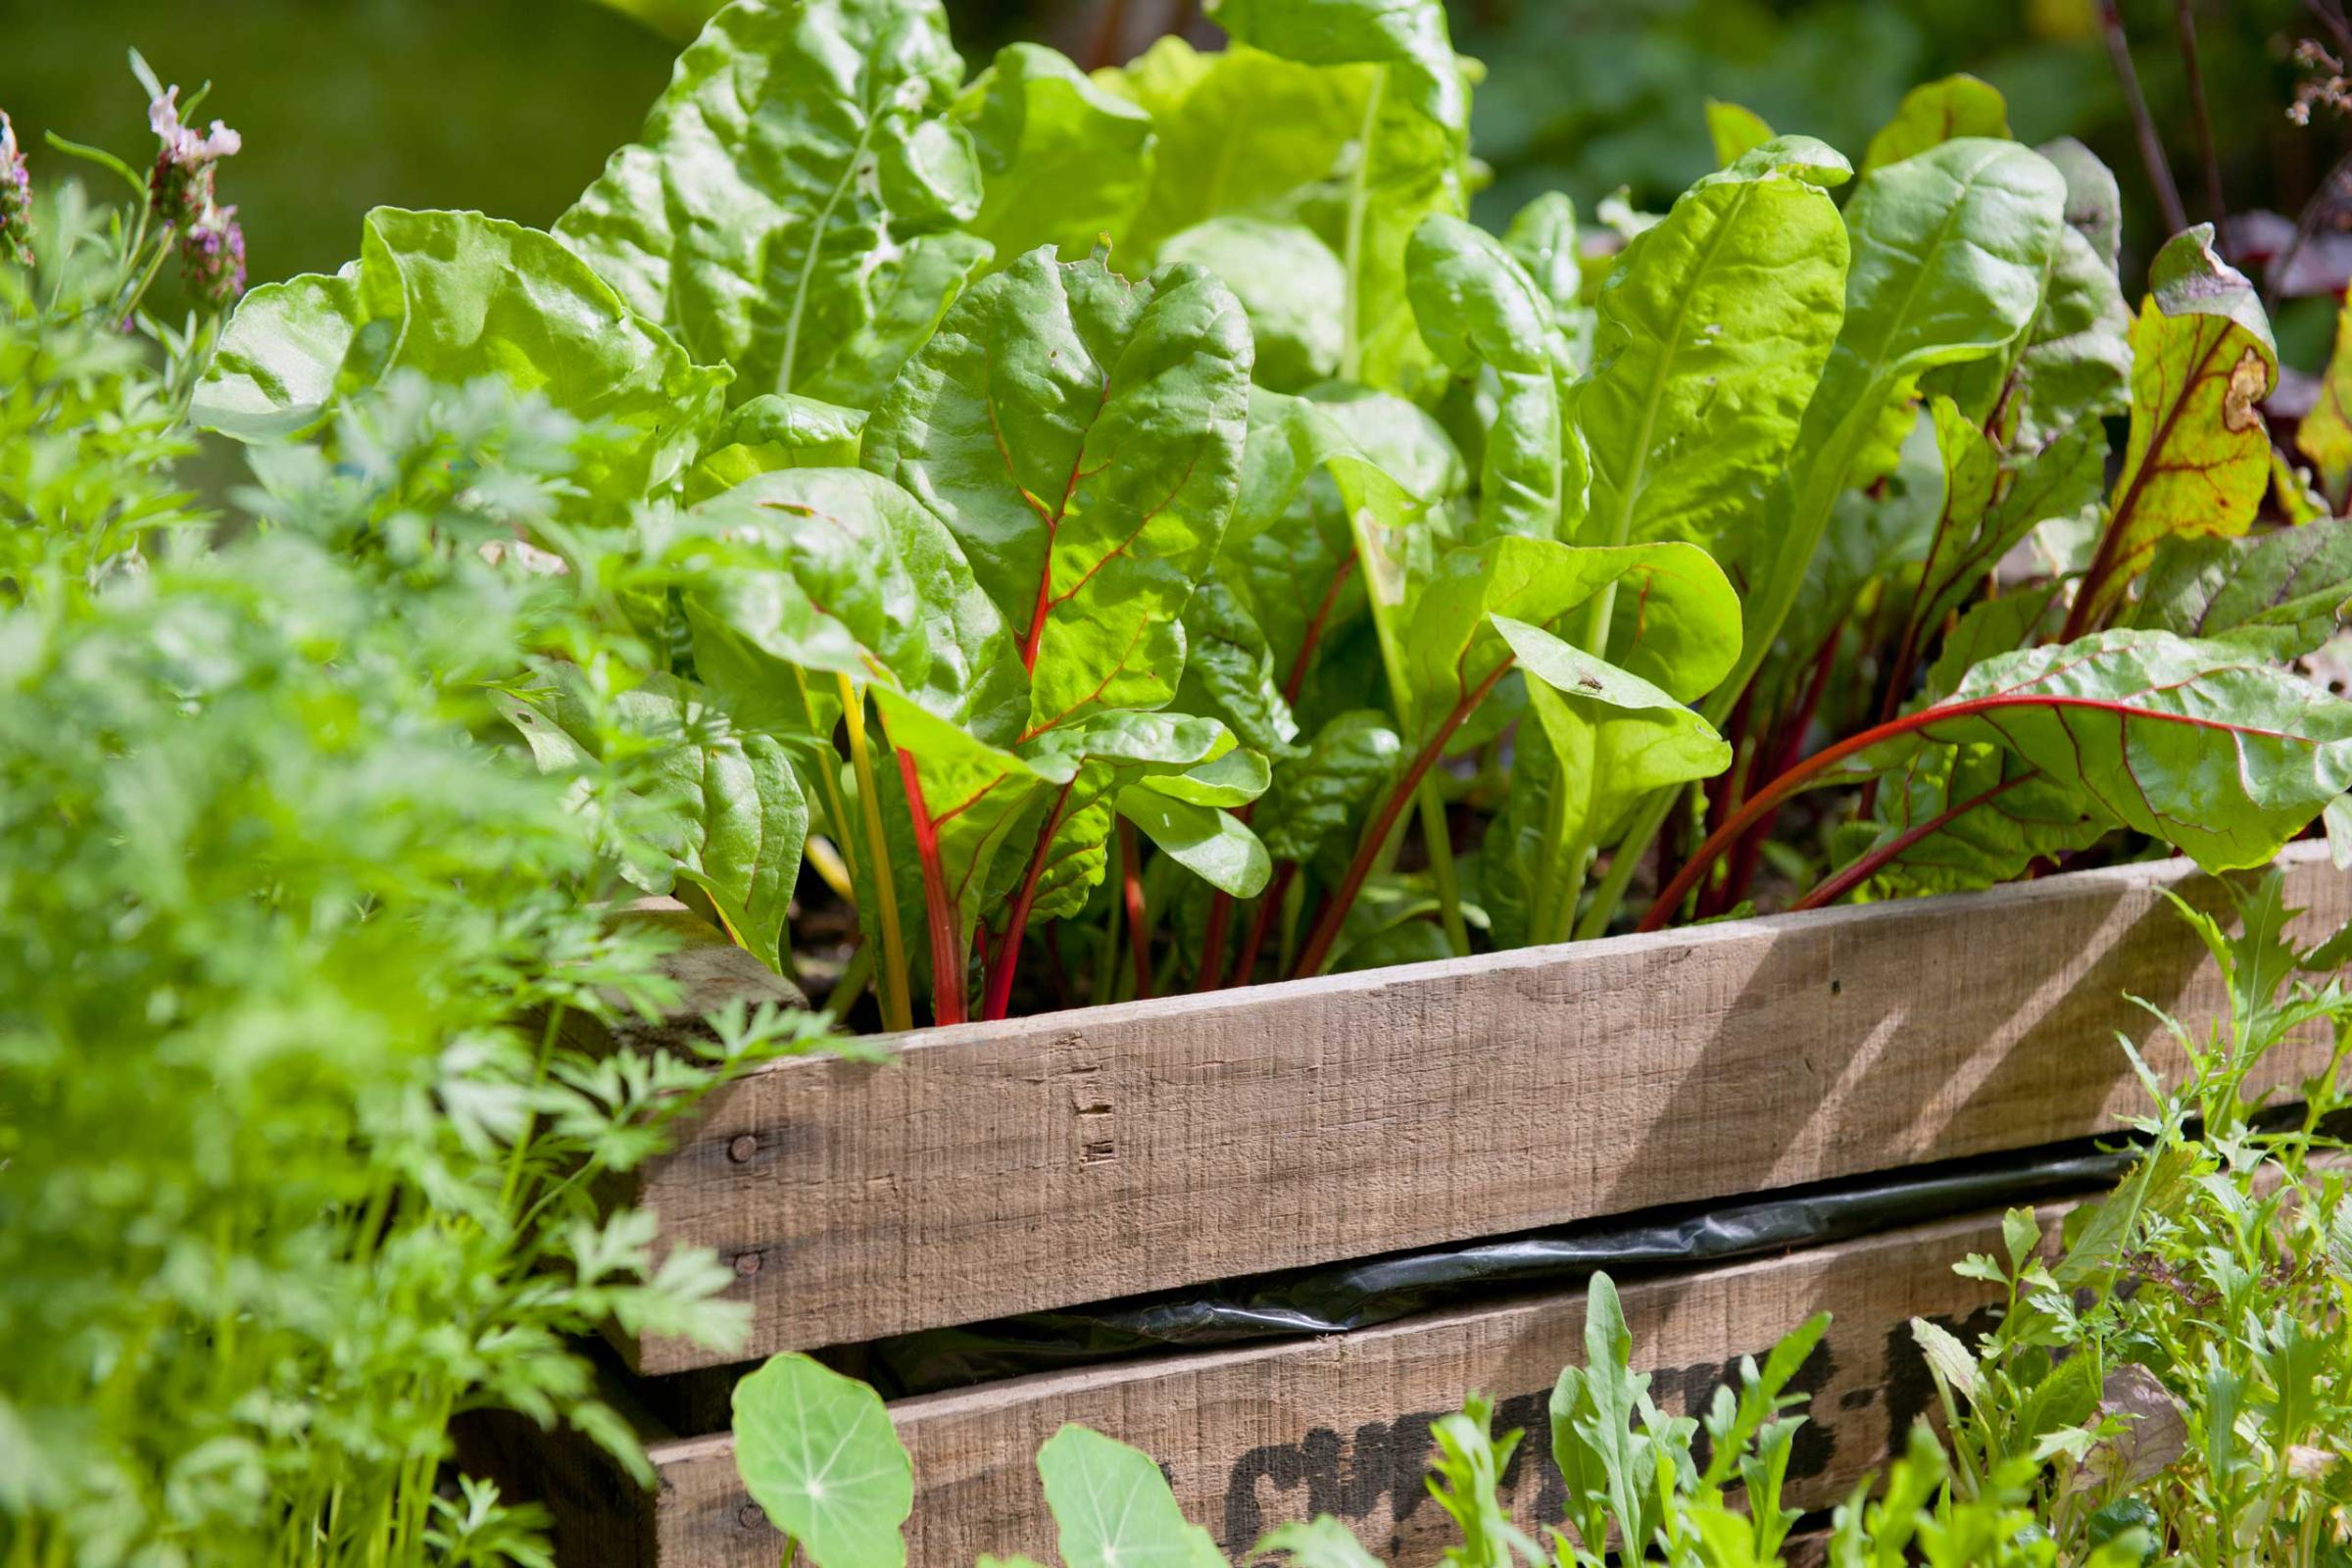 Red chard growing in wooden crate